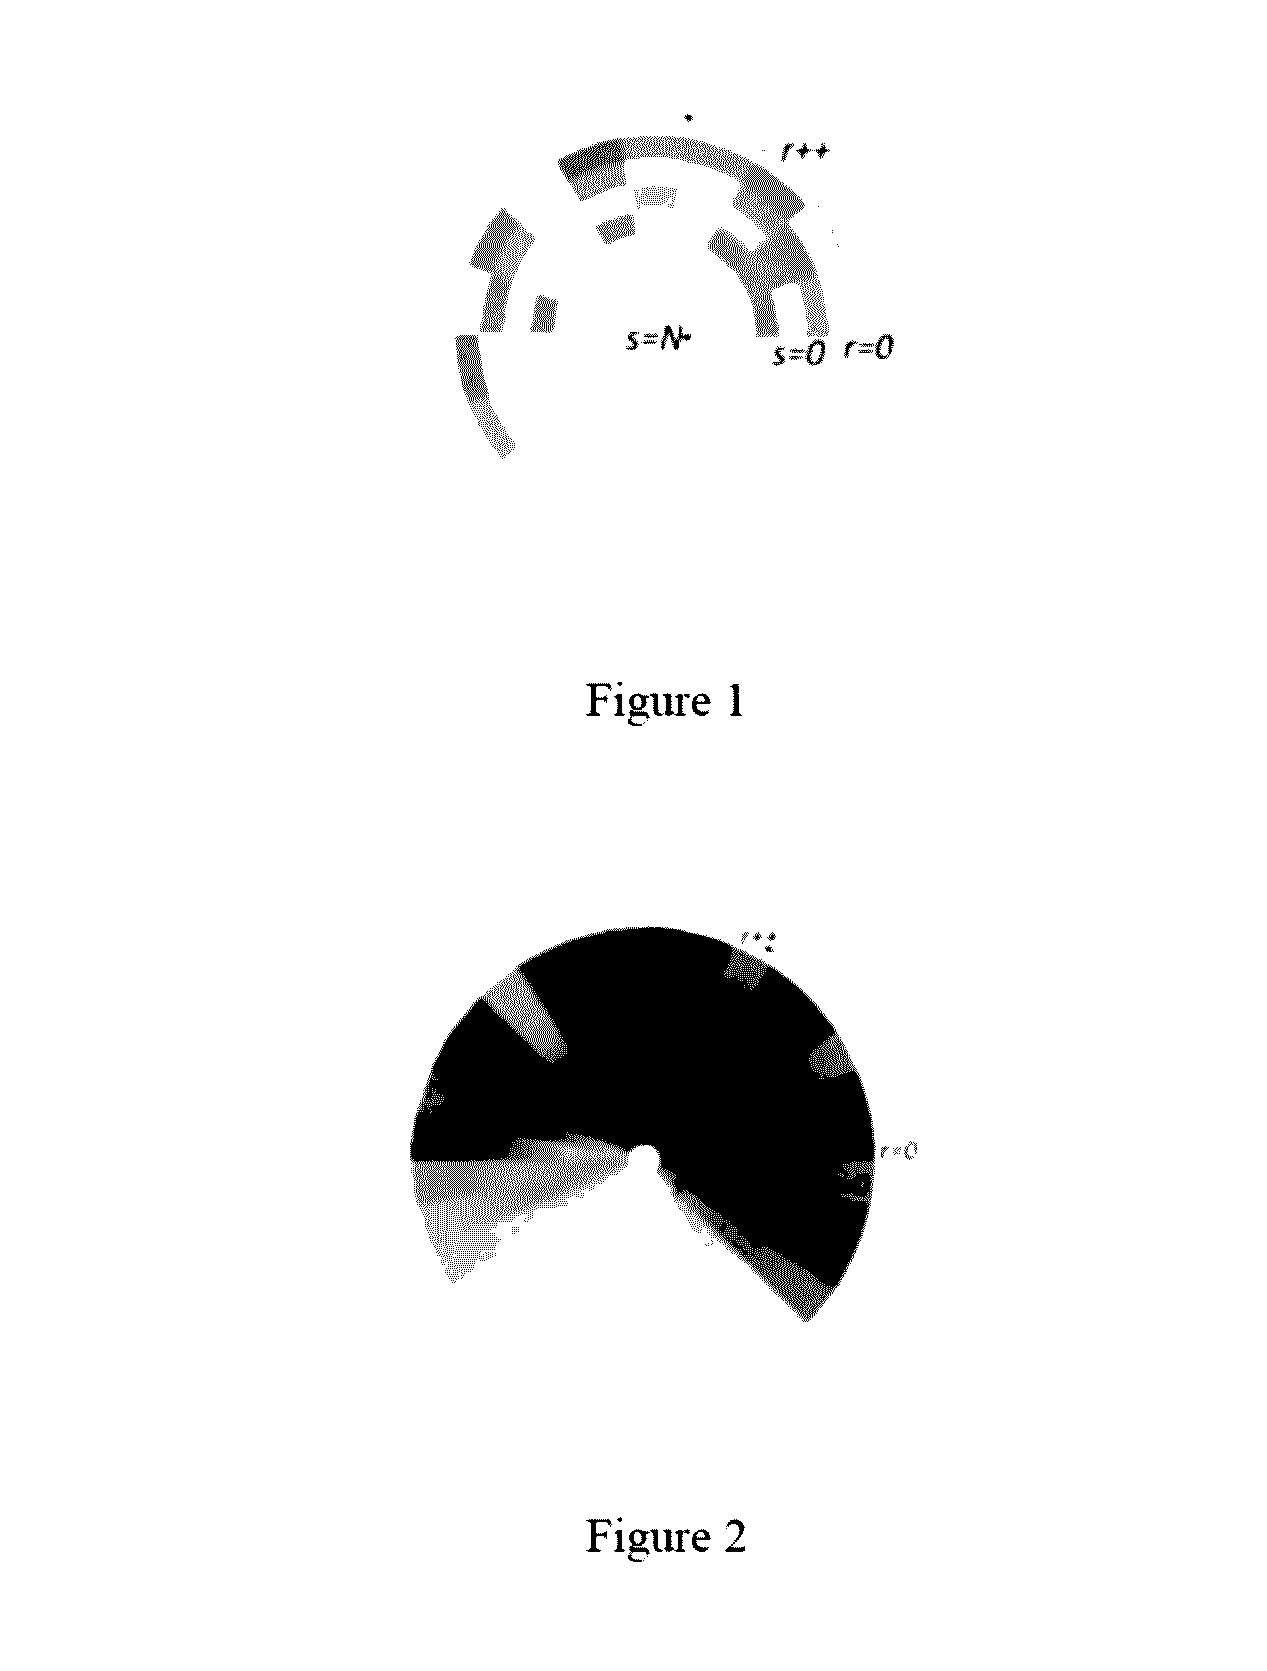 System and method for describing image outlines